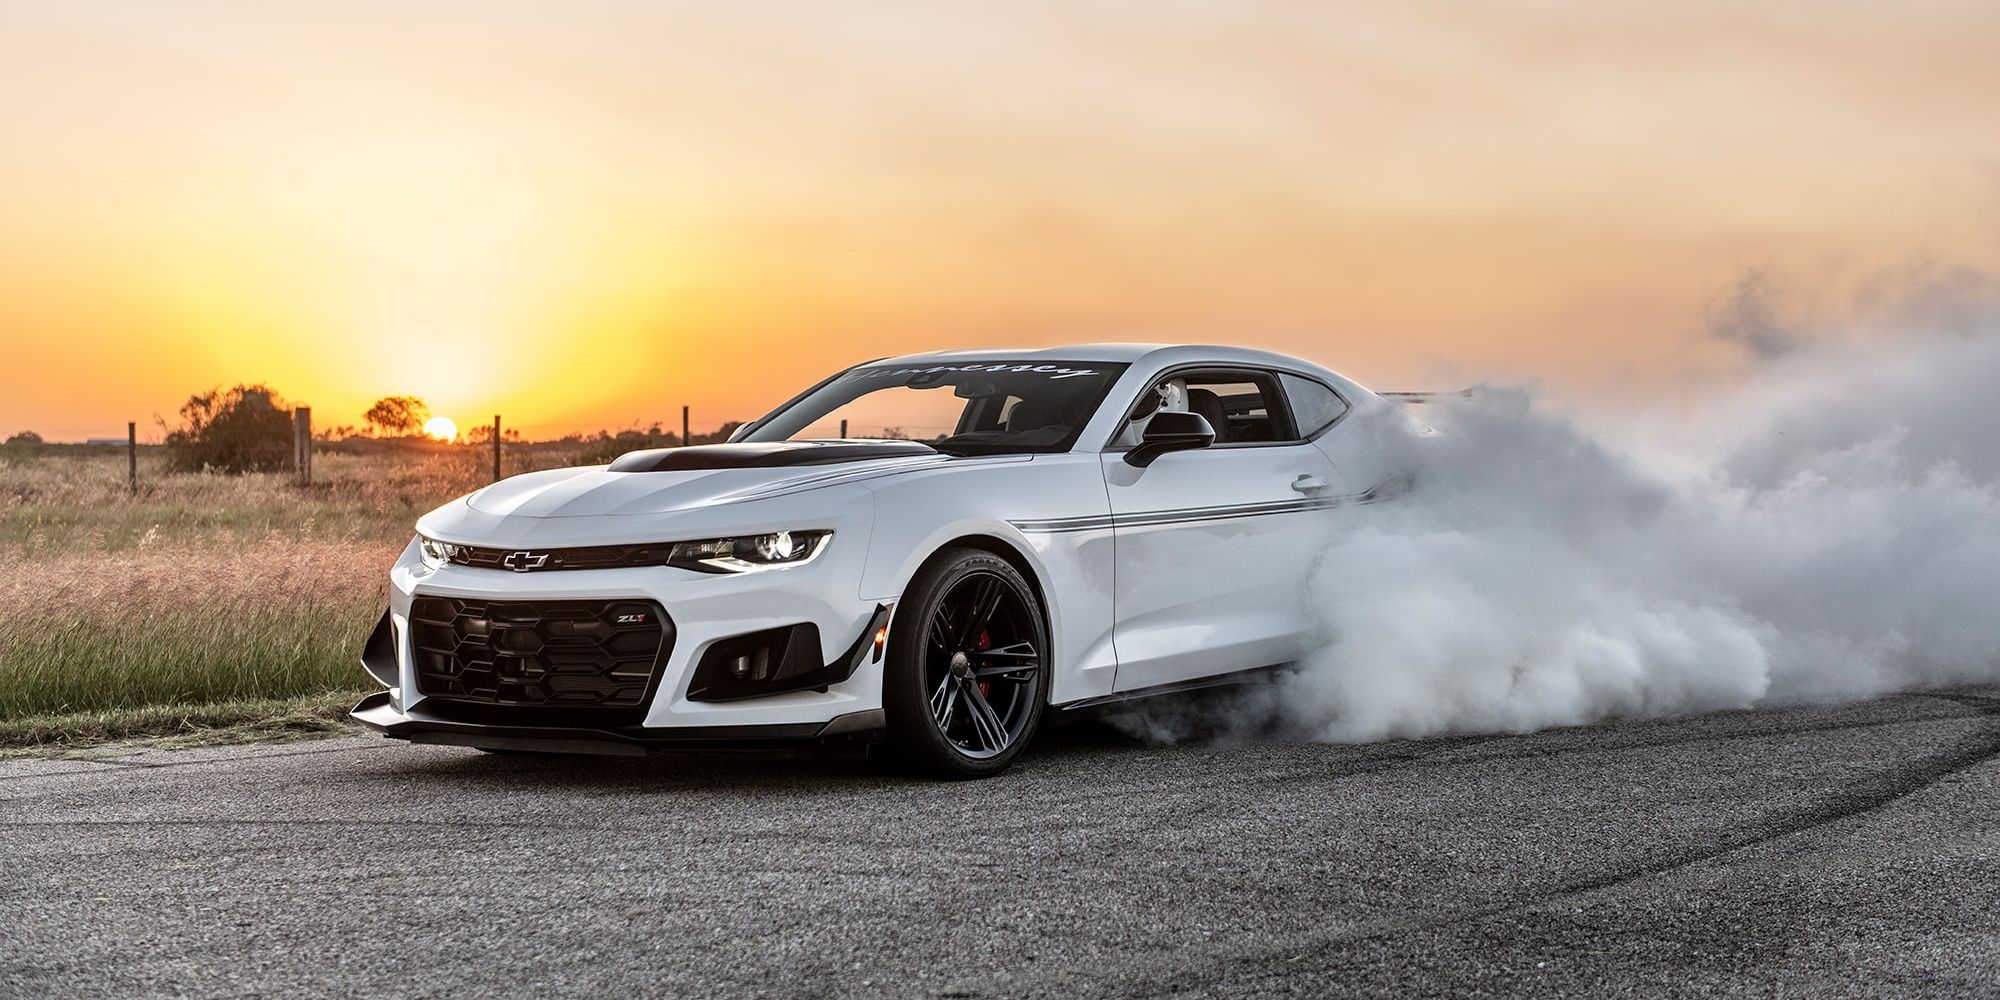 Hennessey Ressurection Camaro ZL1 1LE 1200hp Cropped